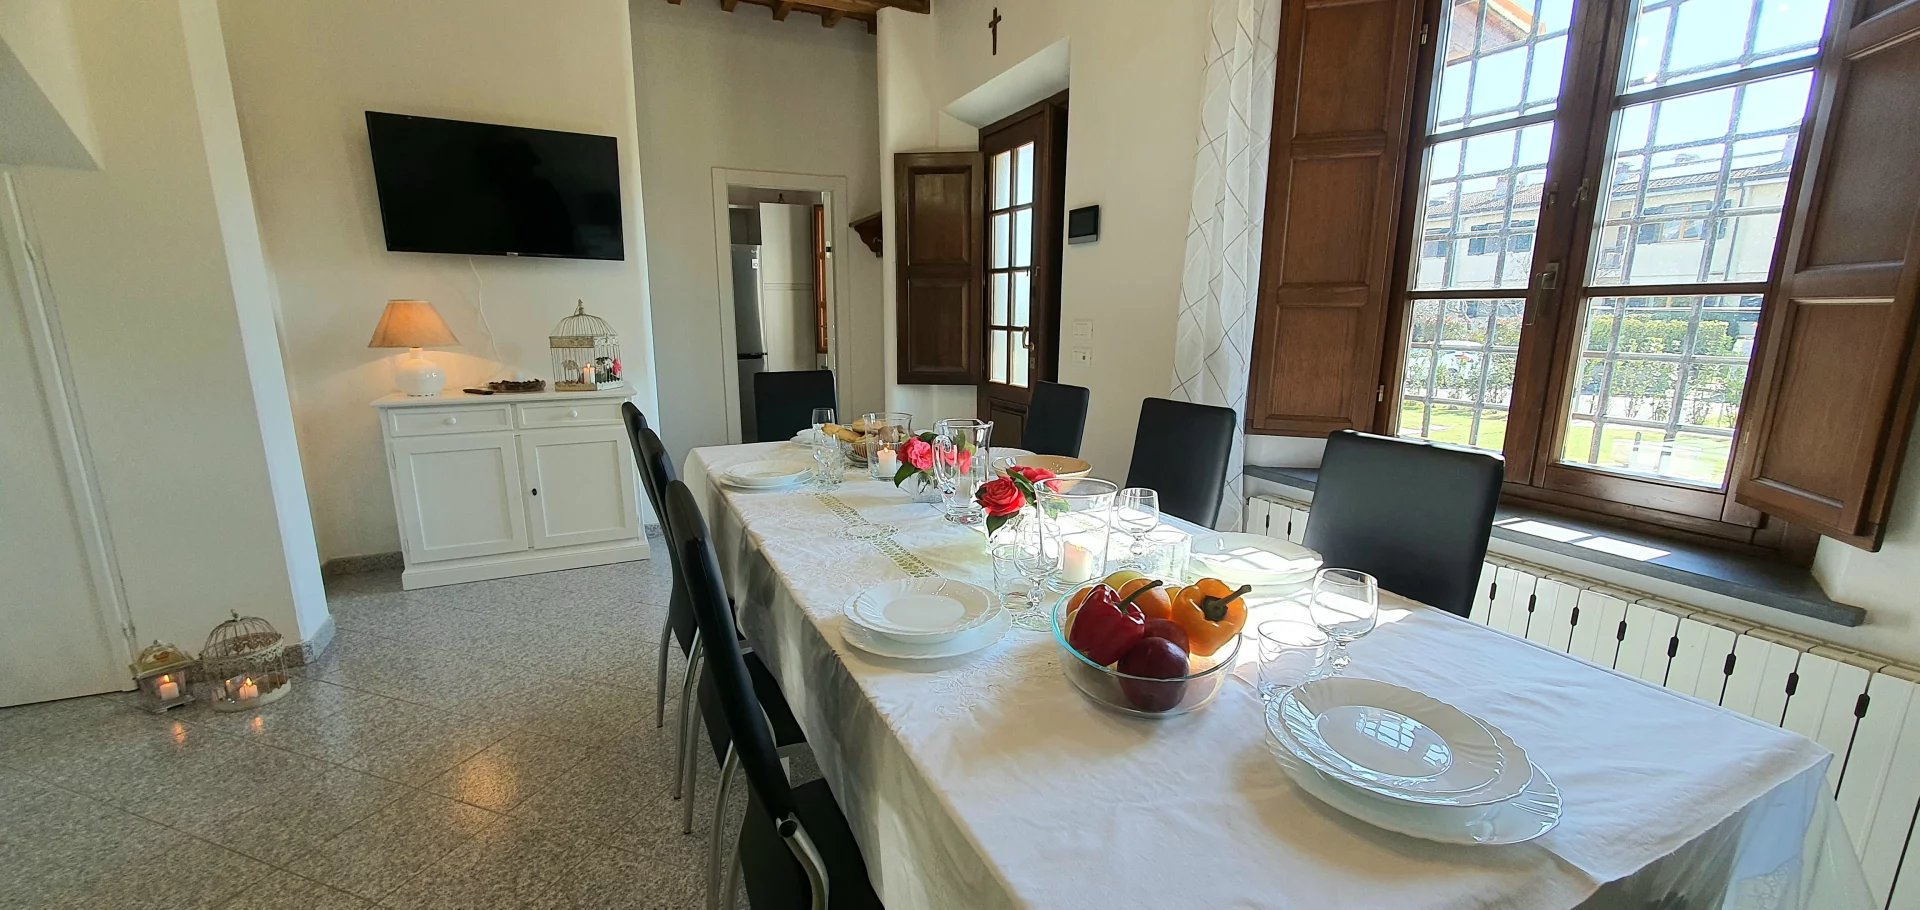 ITALY, TUSCANY, LUCCA, BEAUTIFUL FARMHOUSE WITH POOL, FOR 8 PERSONS, FROM € 1.380 PER WEEK